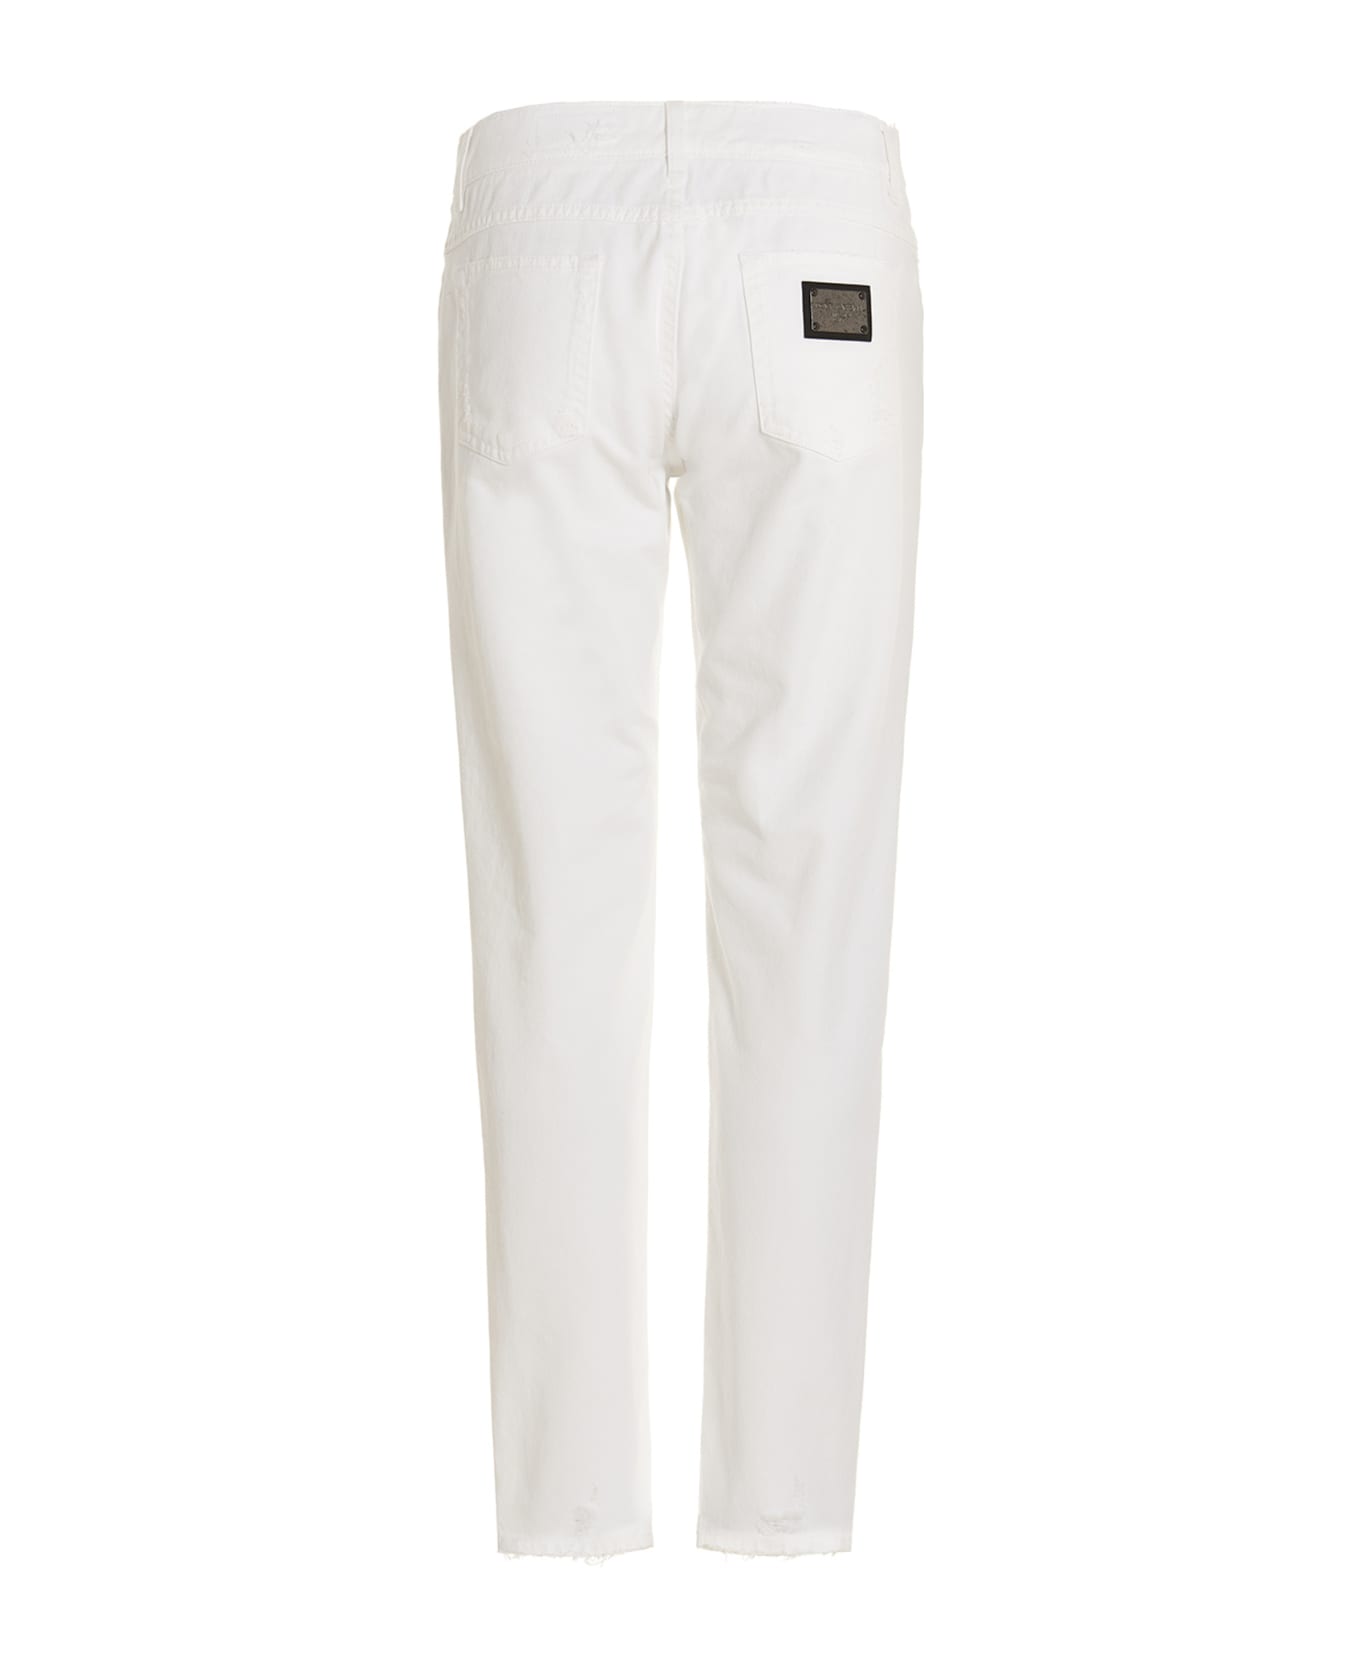 Dolce & Gabbana 're-edition S/s 2001' Jeans - White